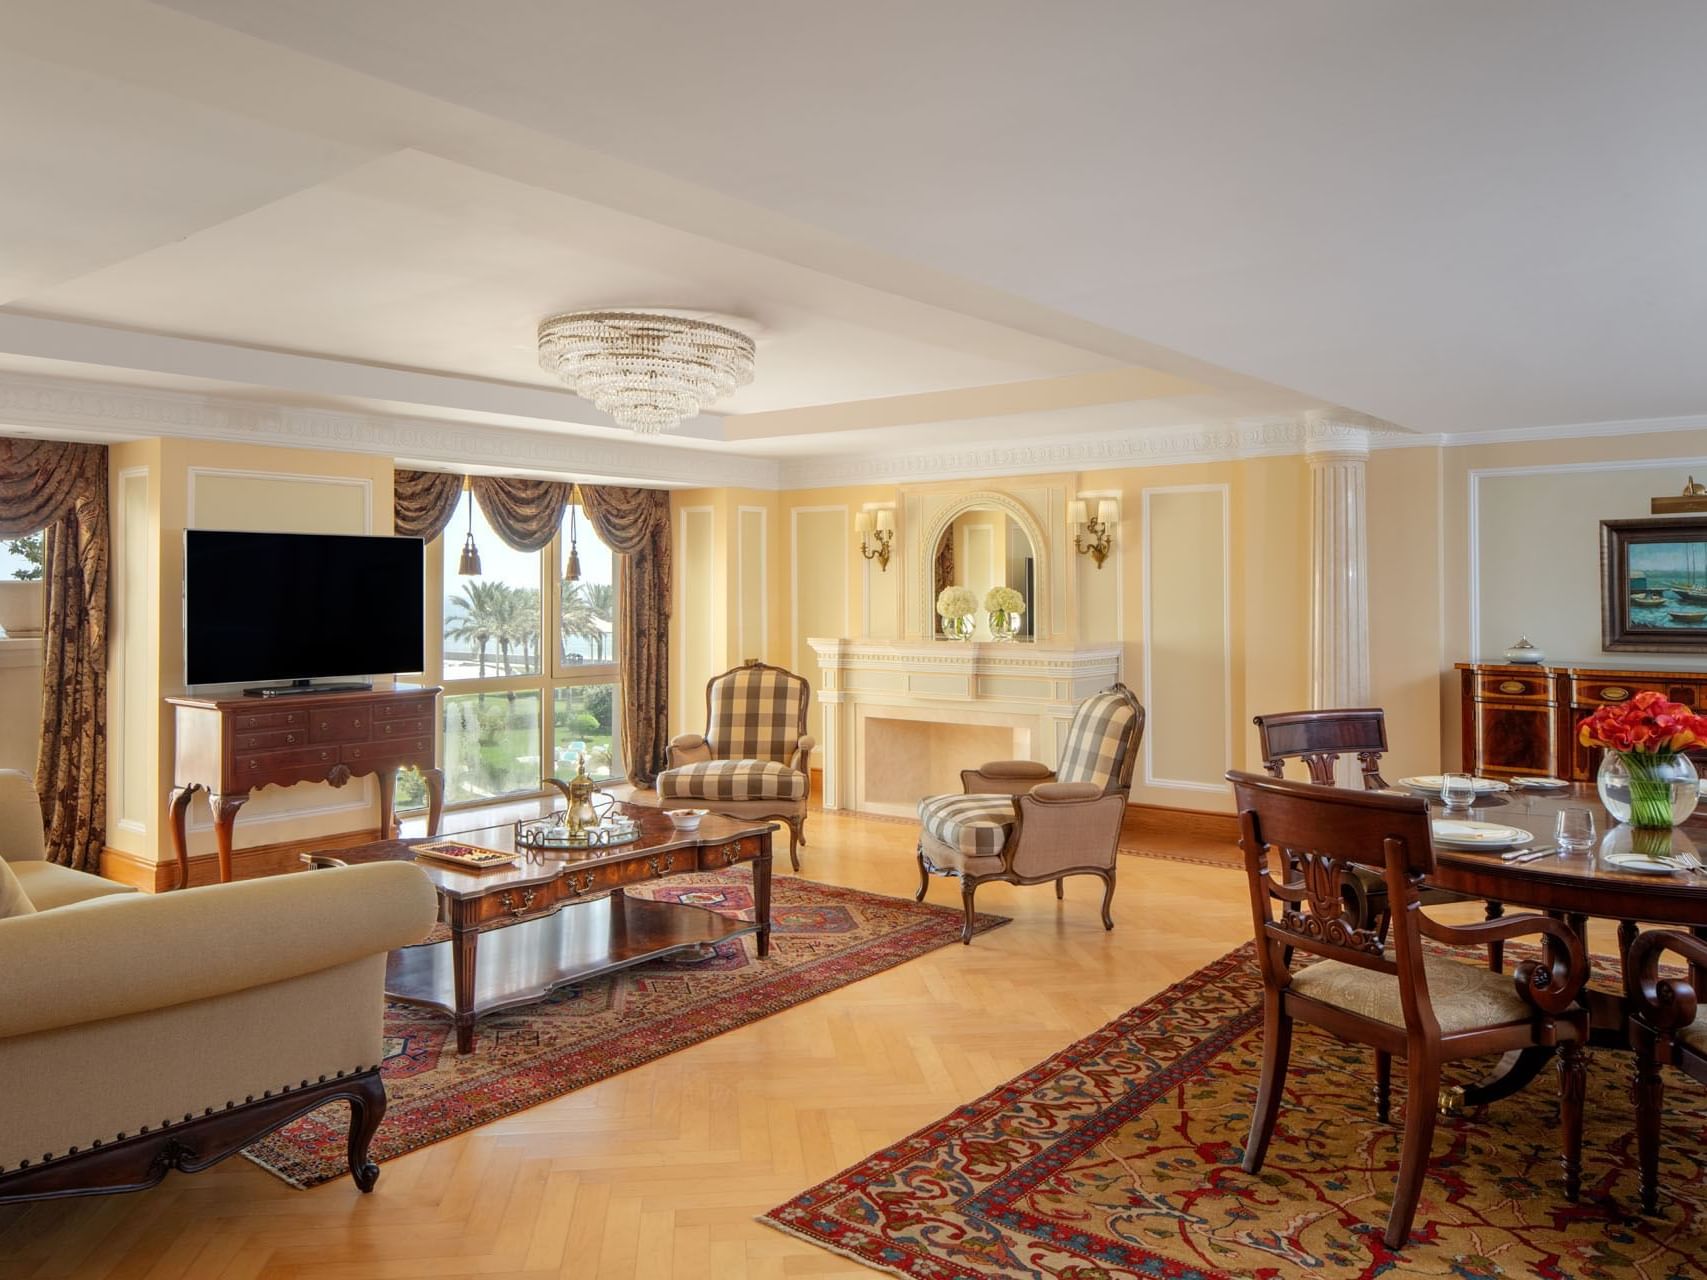 Living area with a TV & sofas in Qaruh Suite, The Regency Hotel